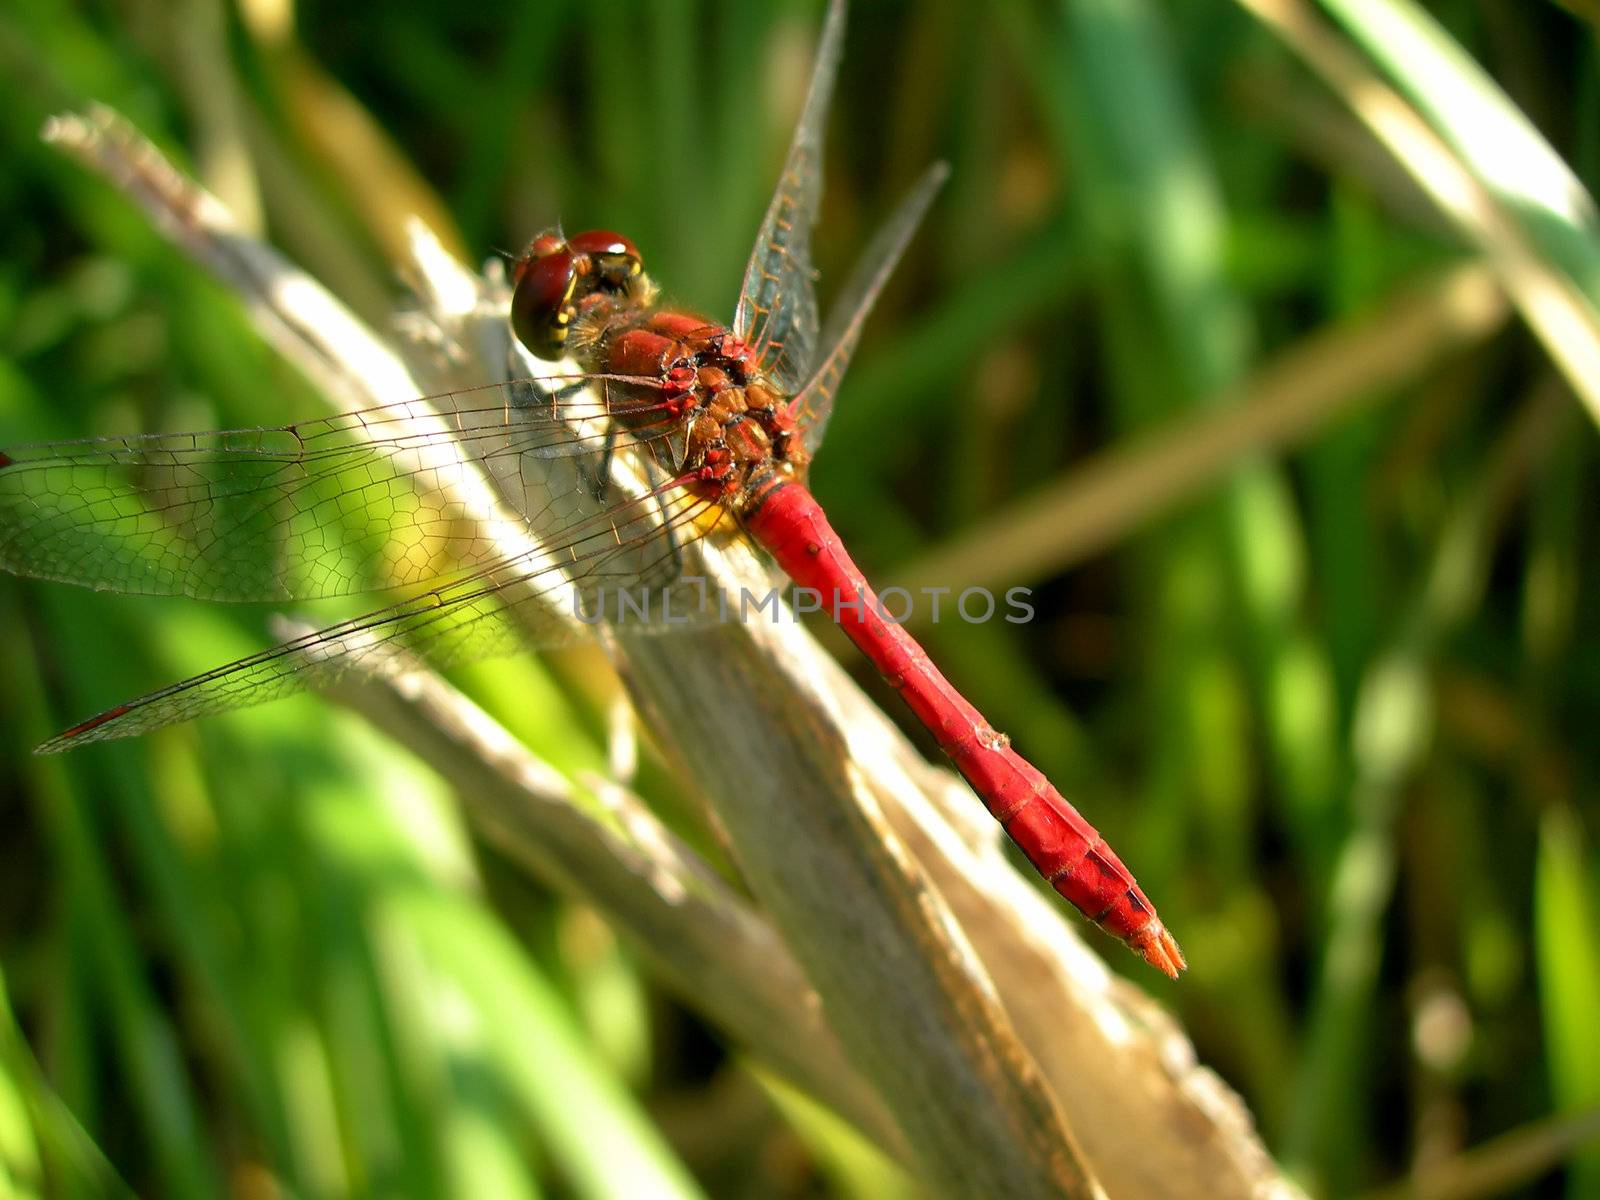            Red dragofly is sitting on a stalk of grass 